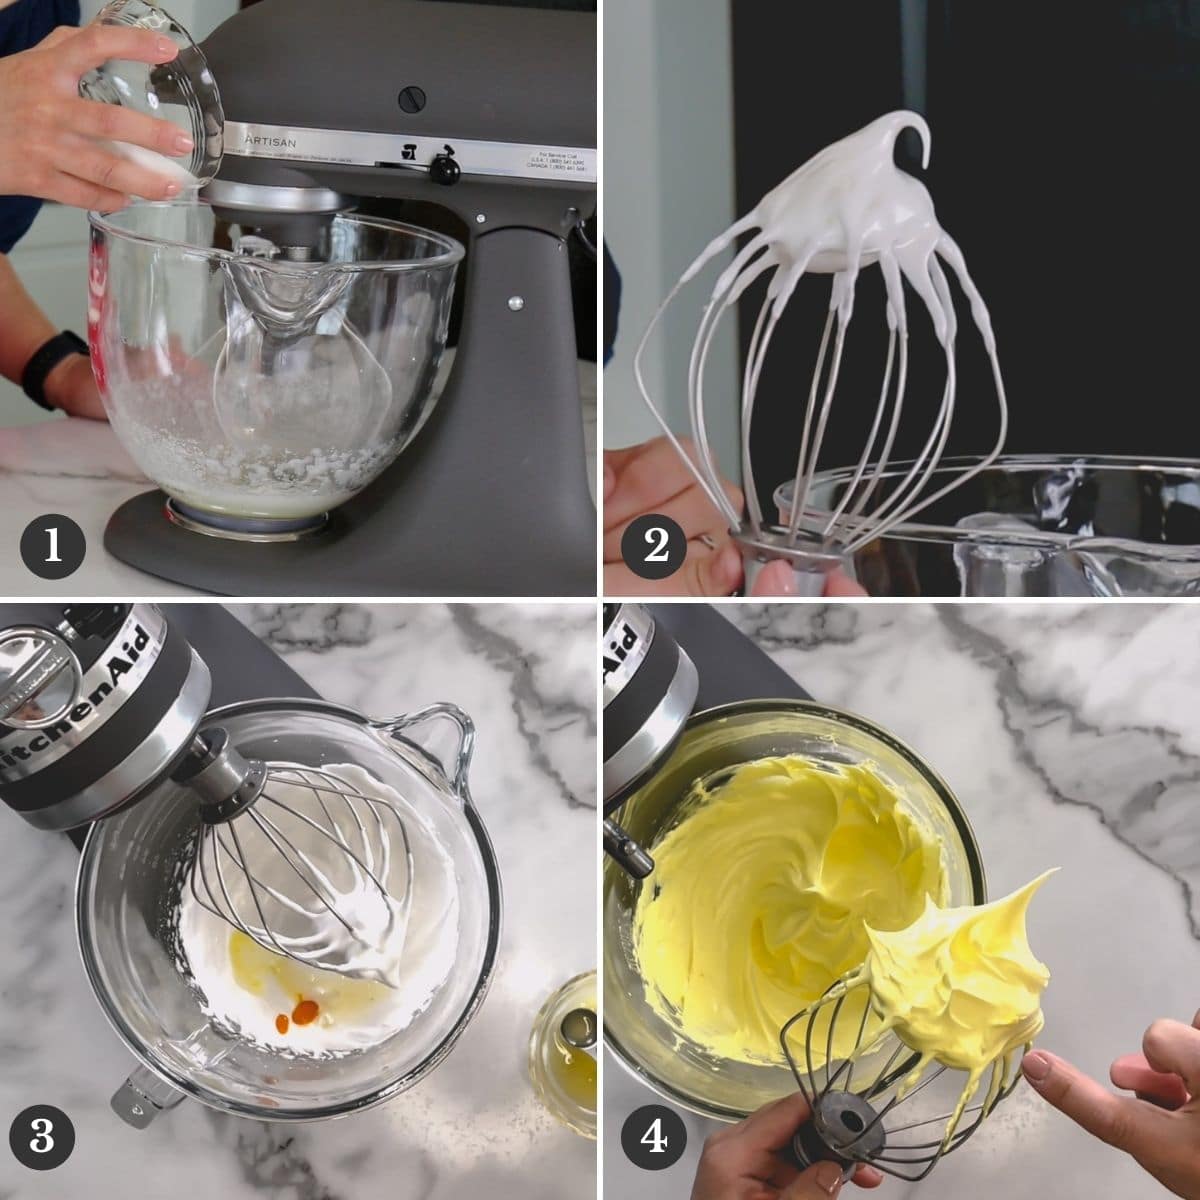 Step by step photos of mixing meringue.